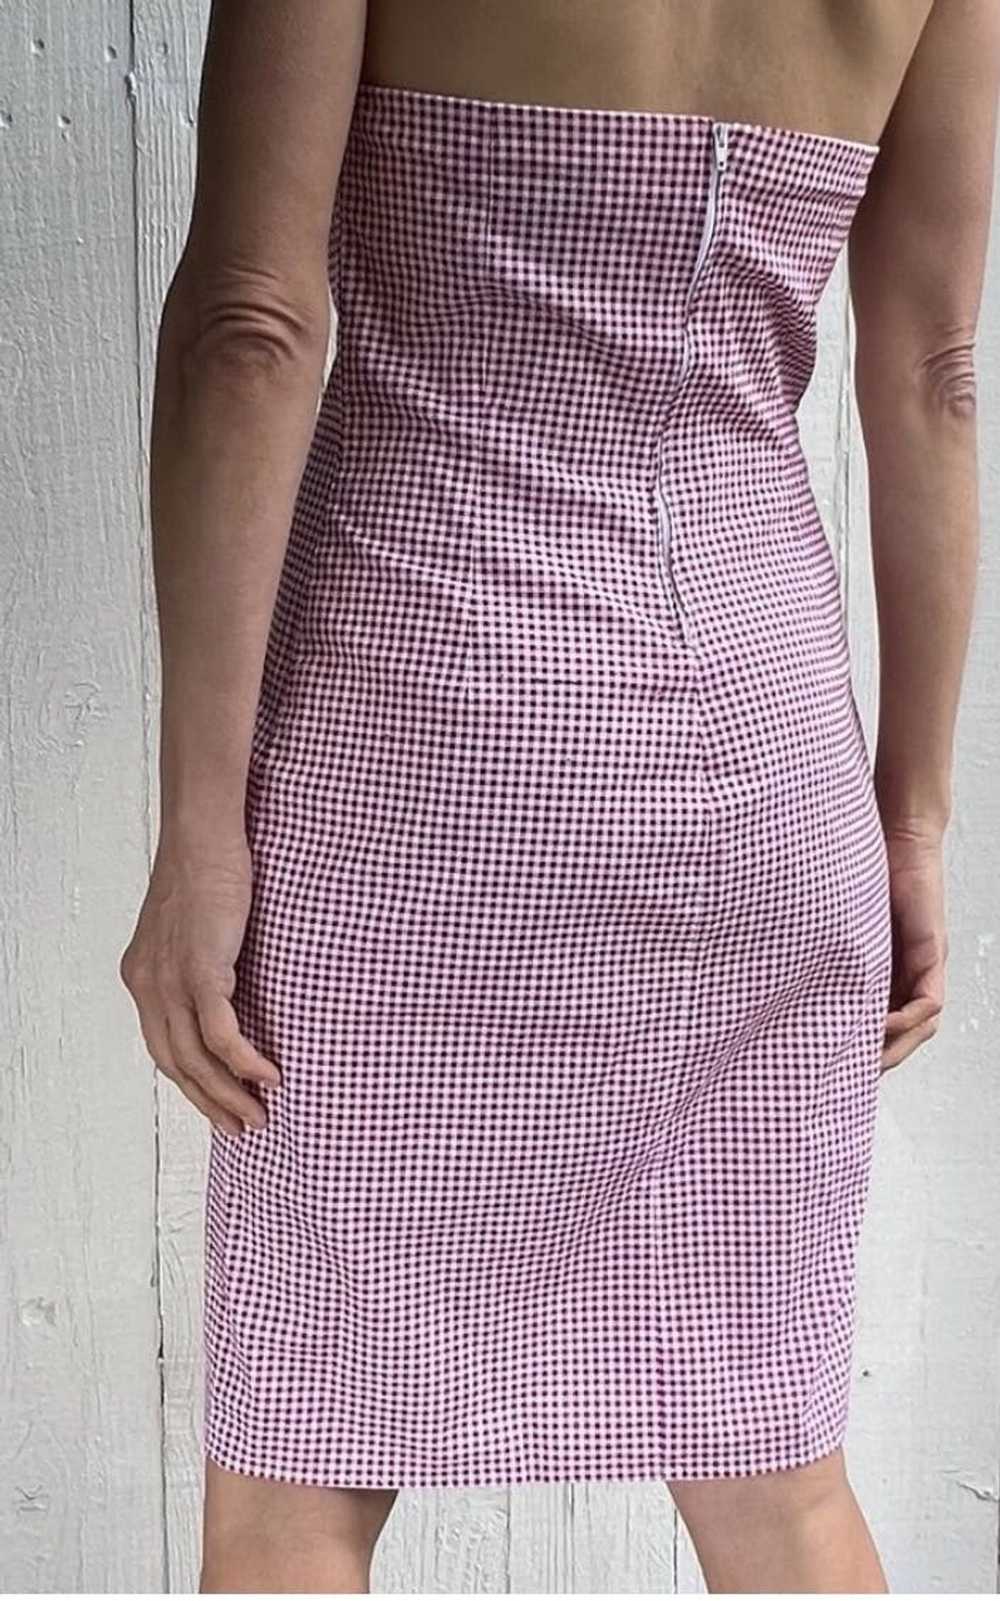 Other FRENCH CURVE CLOTHING Checkered Pattern Str… - image 9